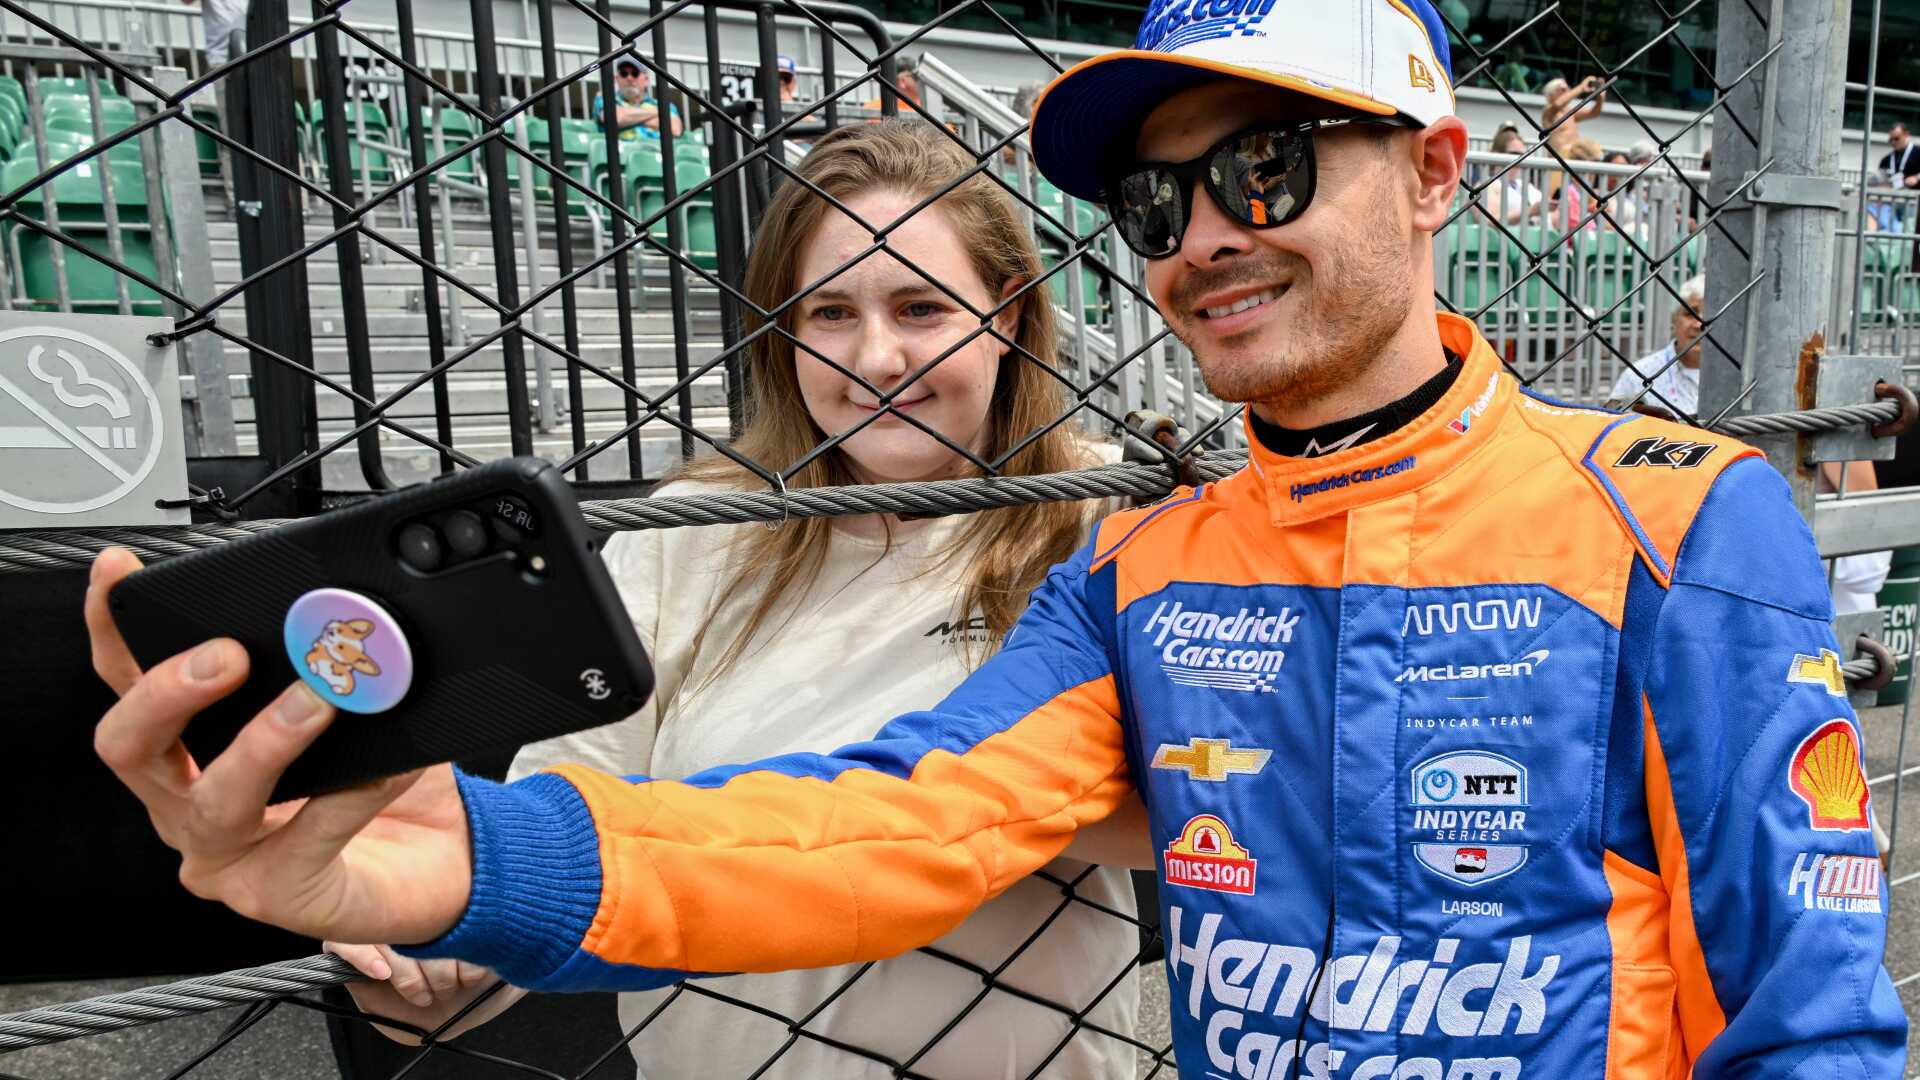 NASCAR’s Kyle Larson quick learner at Indy 500 ‘Fast Friday’ as Colton Herta tops charts